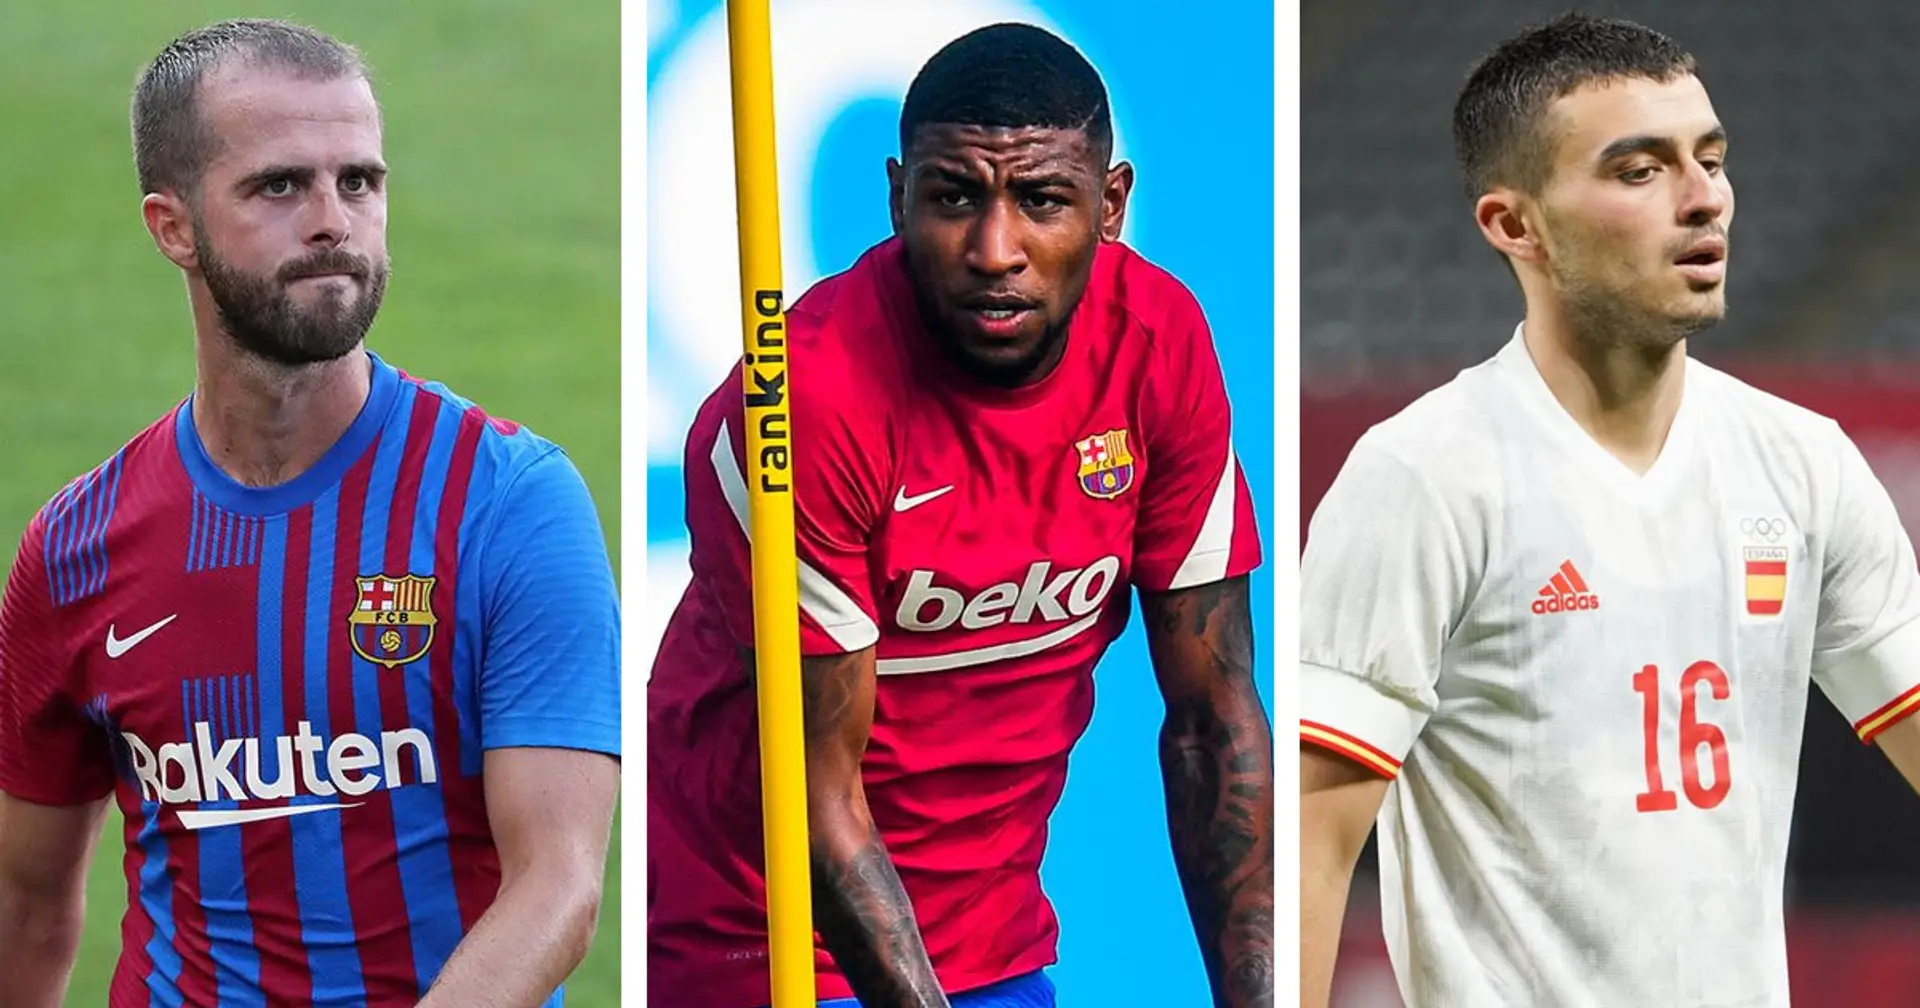 Emerson joins Coutinho and Aguero in training & 4 more under-radar stories at Barca